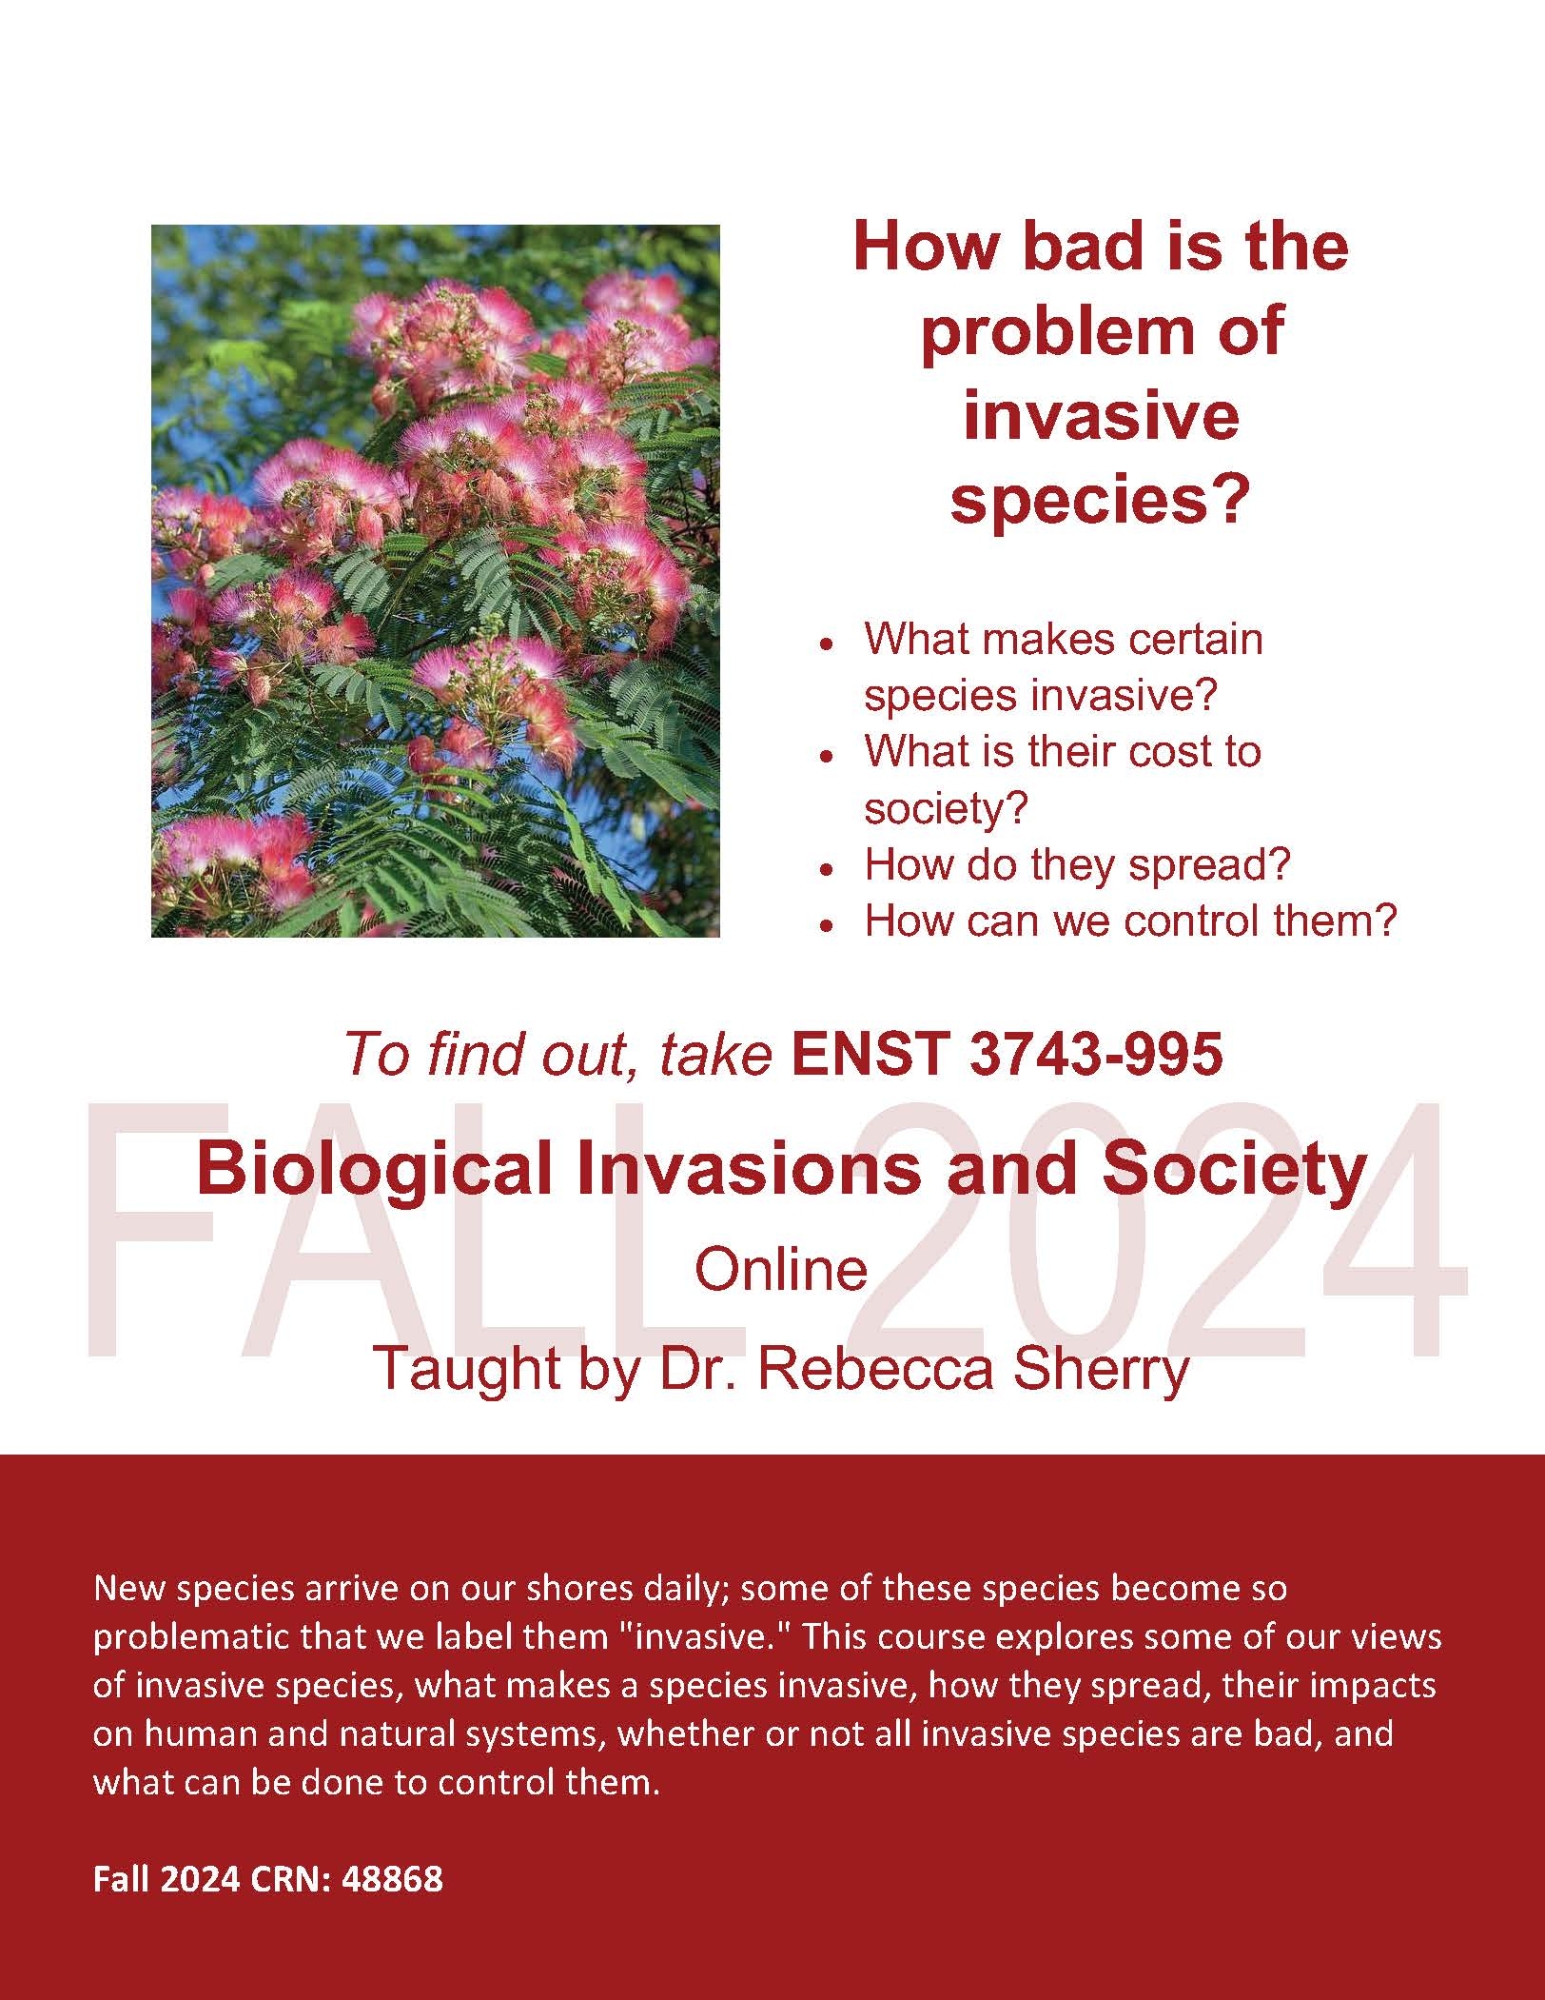 How bad is the problem of invasive species? • What makes certain species invasive? • What is their cost to society? • How do they spread? • How can we control them? To find out, take ENST 3743-995 Biological Invasions and Society Online Taught by Dr. Rebecca Sherry New species arrive on our shores daily; some of these species become so problematic that we label them "invasive." This course explores some of our views of invasive species, what makes a species invasive, how they spread, their impacts on human and natural systems, whether or not all invasive species are bad, and what can be done to control them. Fall 2024 CRN: 48868